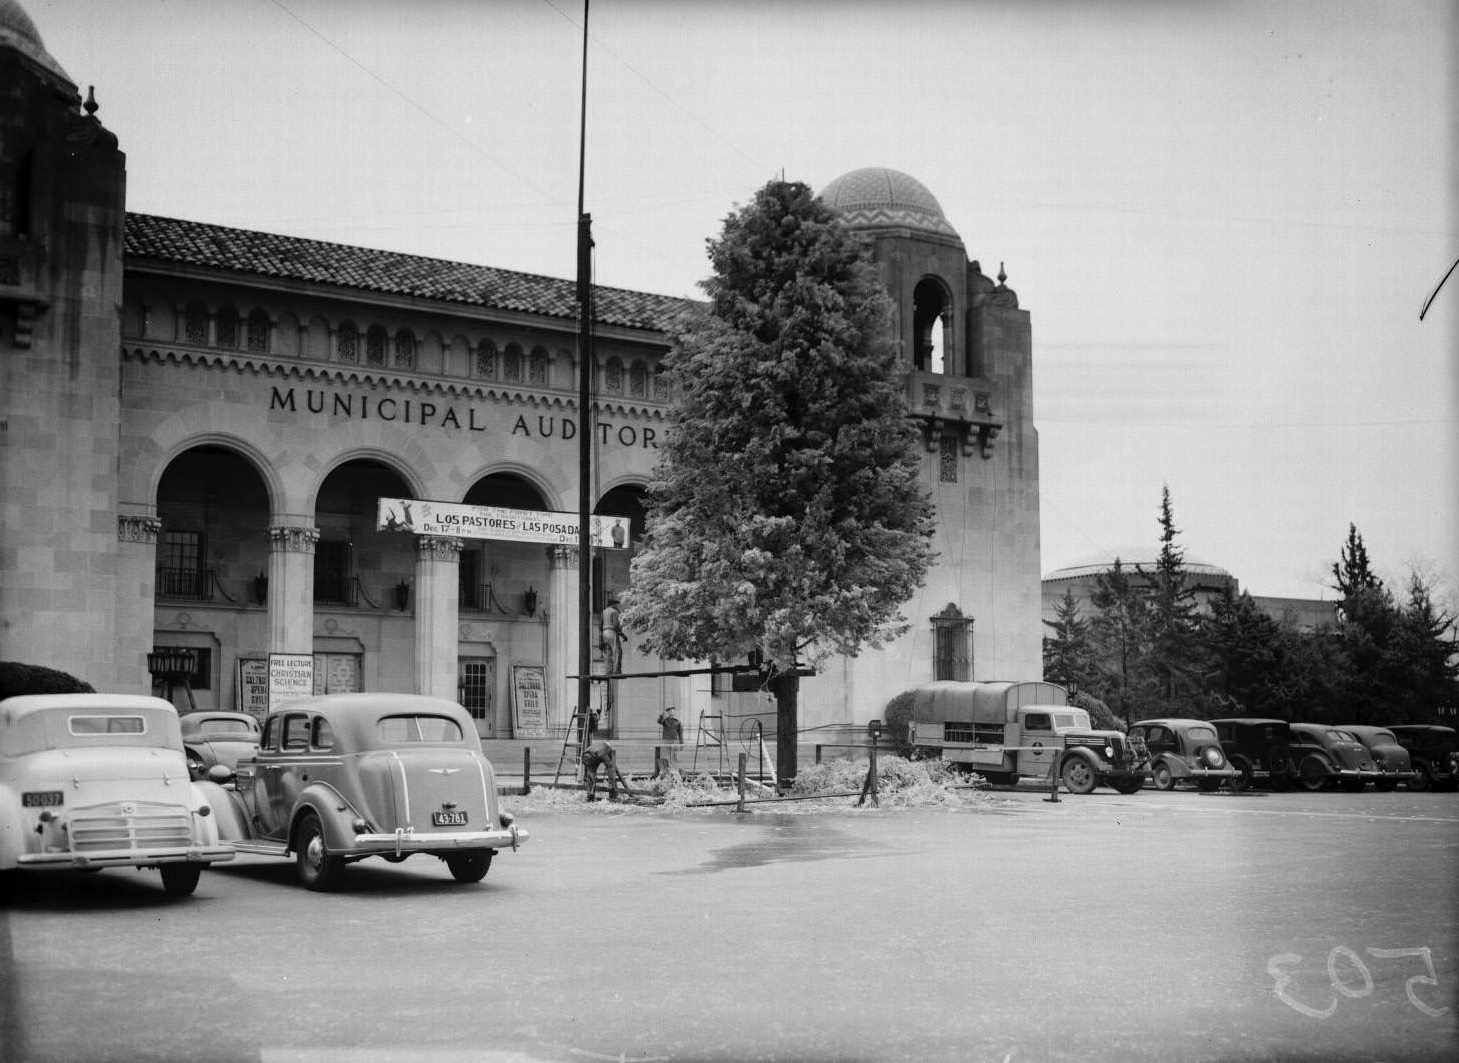 Photograph of the front of the Municipal Auditorium showing the Rotarian Christmas tree, 1930's